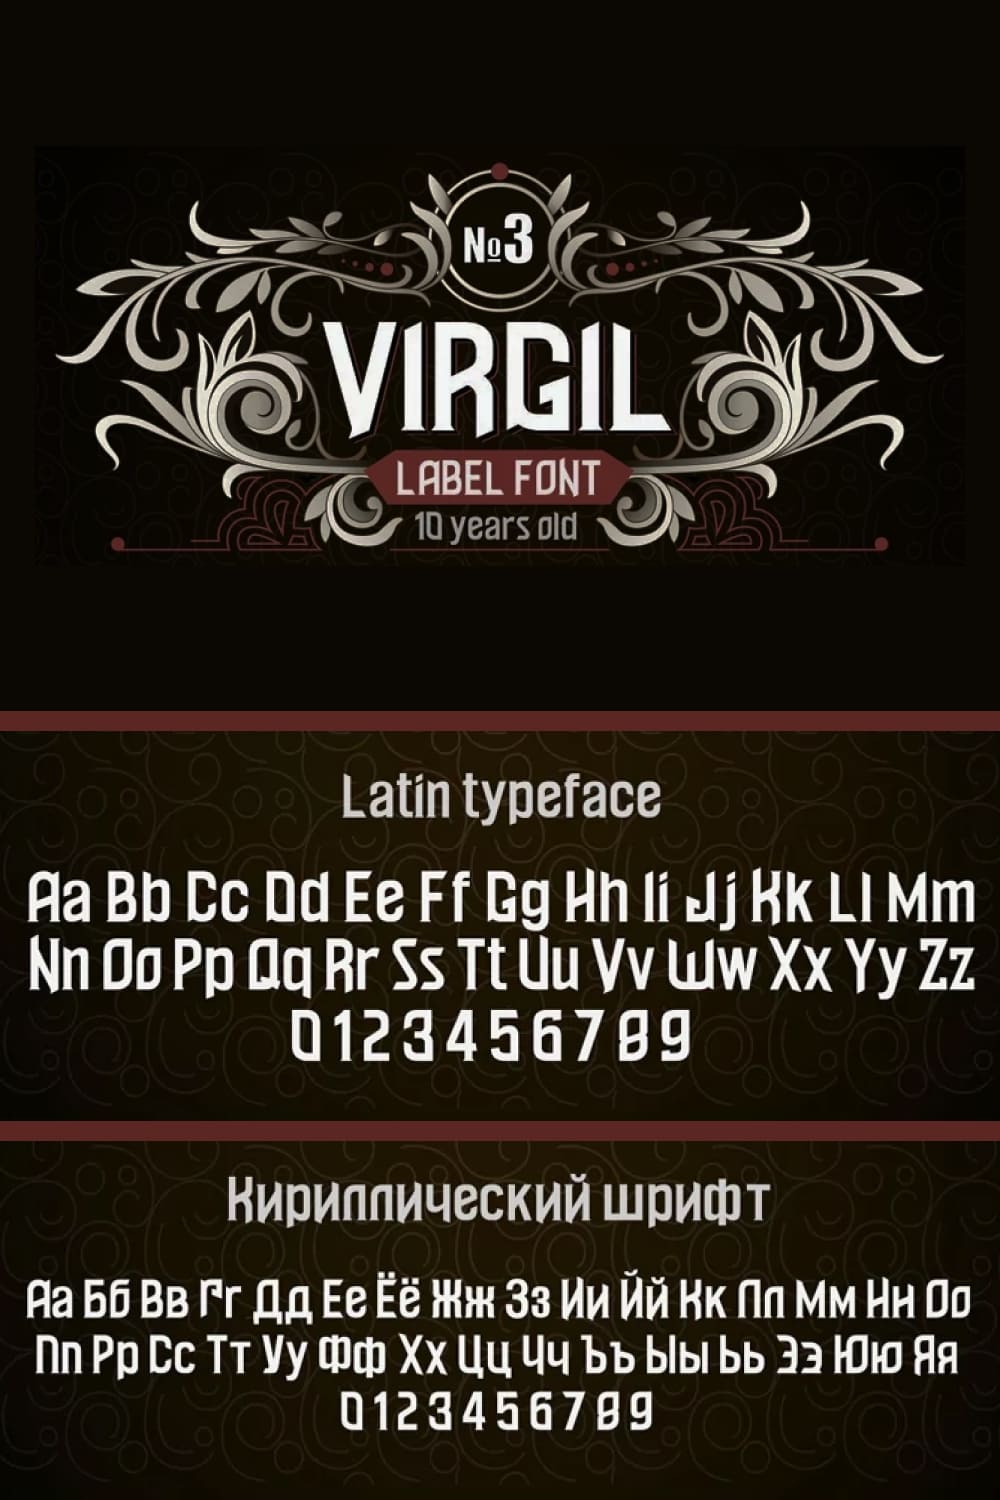 An example of a Vintage Virgil Font in white.